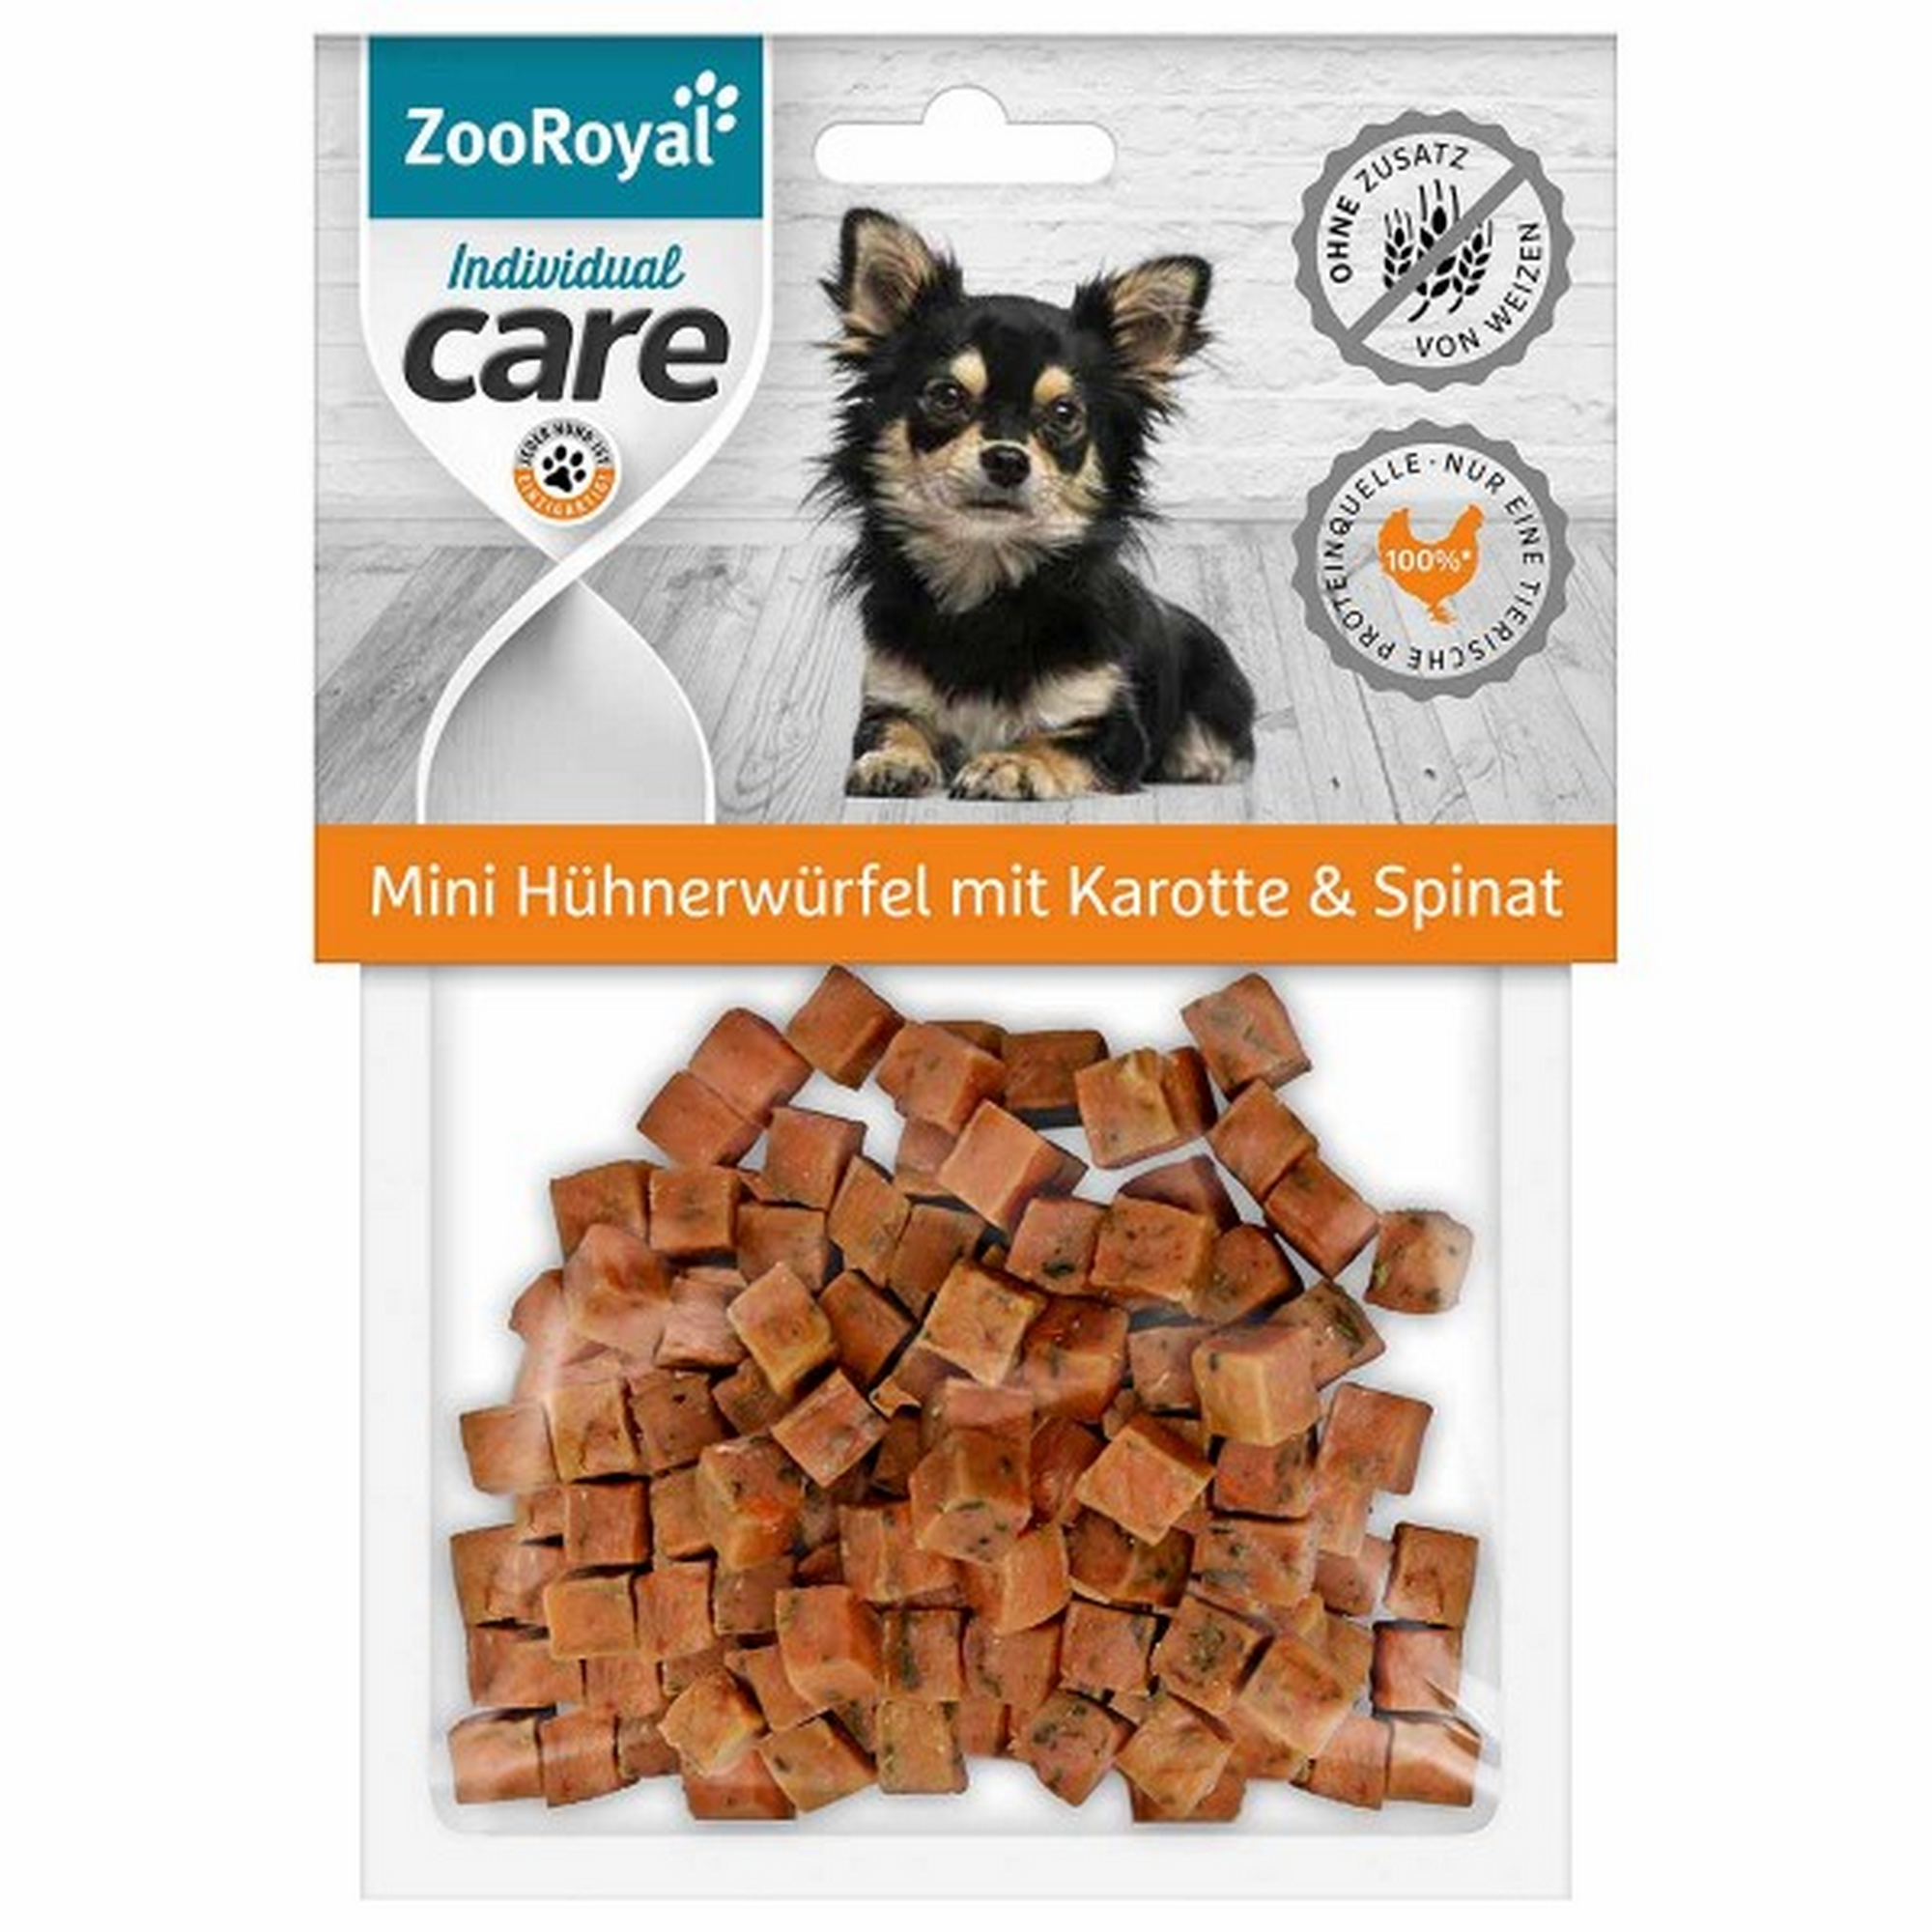 Hundesnack Adult Huhn mit Karotte und Spinat 70 g + product picture